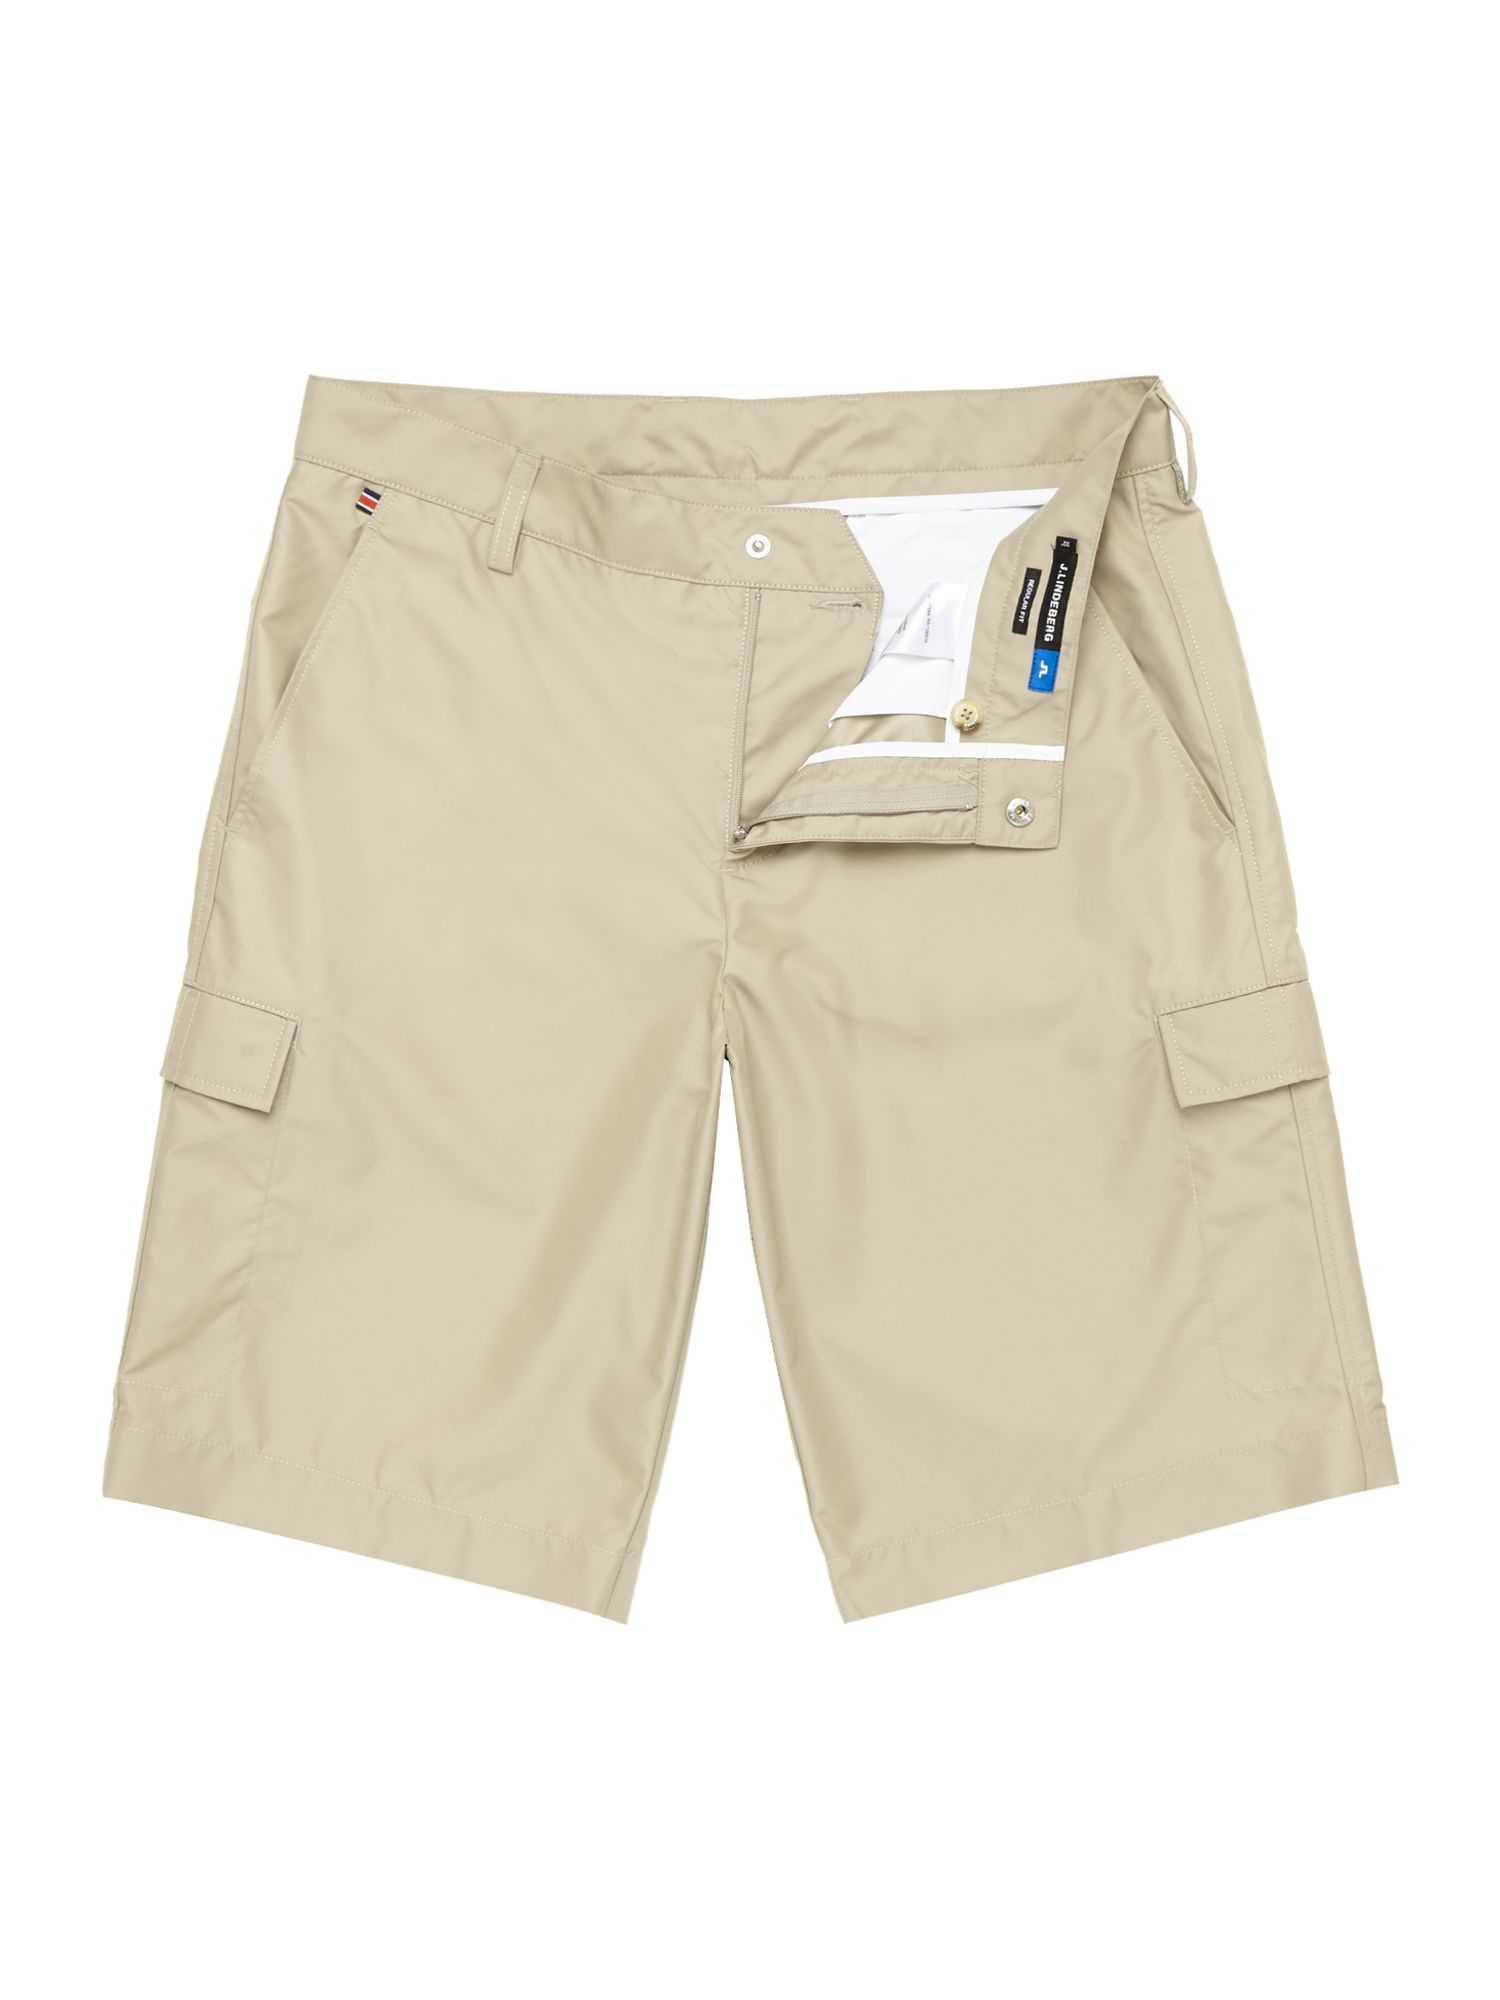 J.lindeberg Lawrence Micro Twill Short in Natural for Men | Lyst